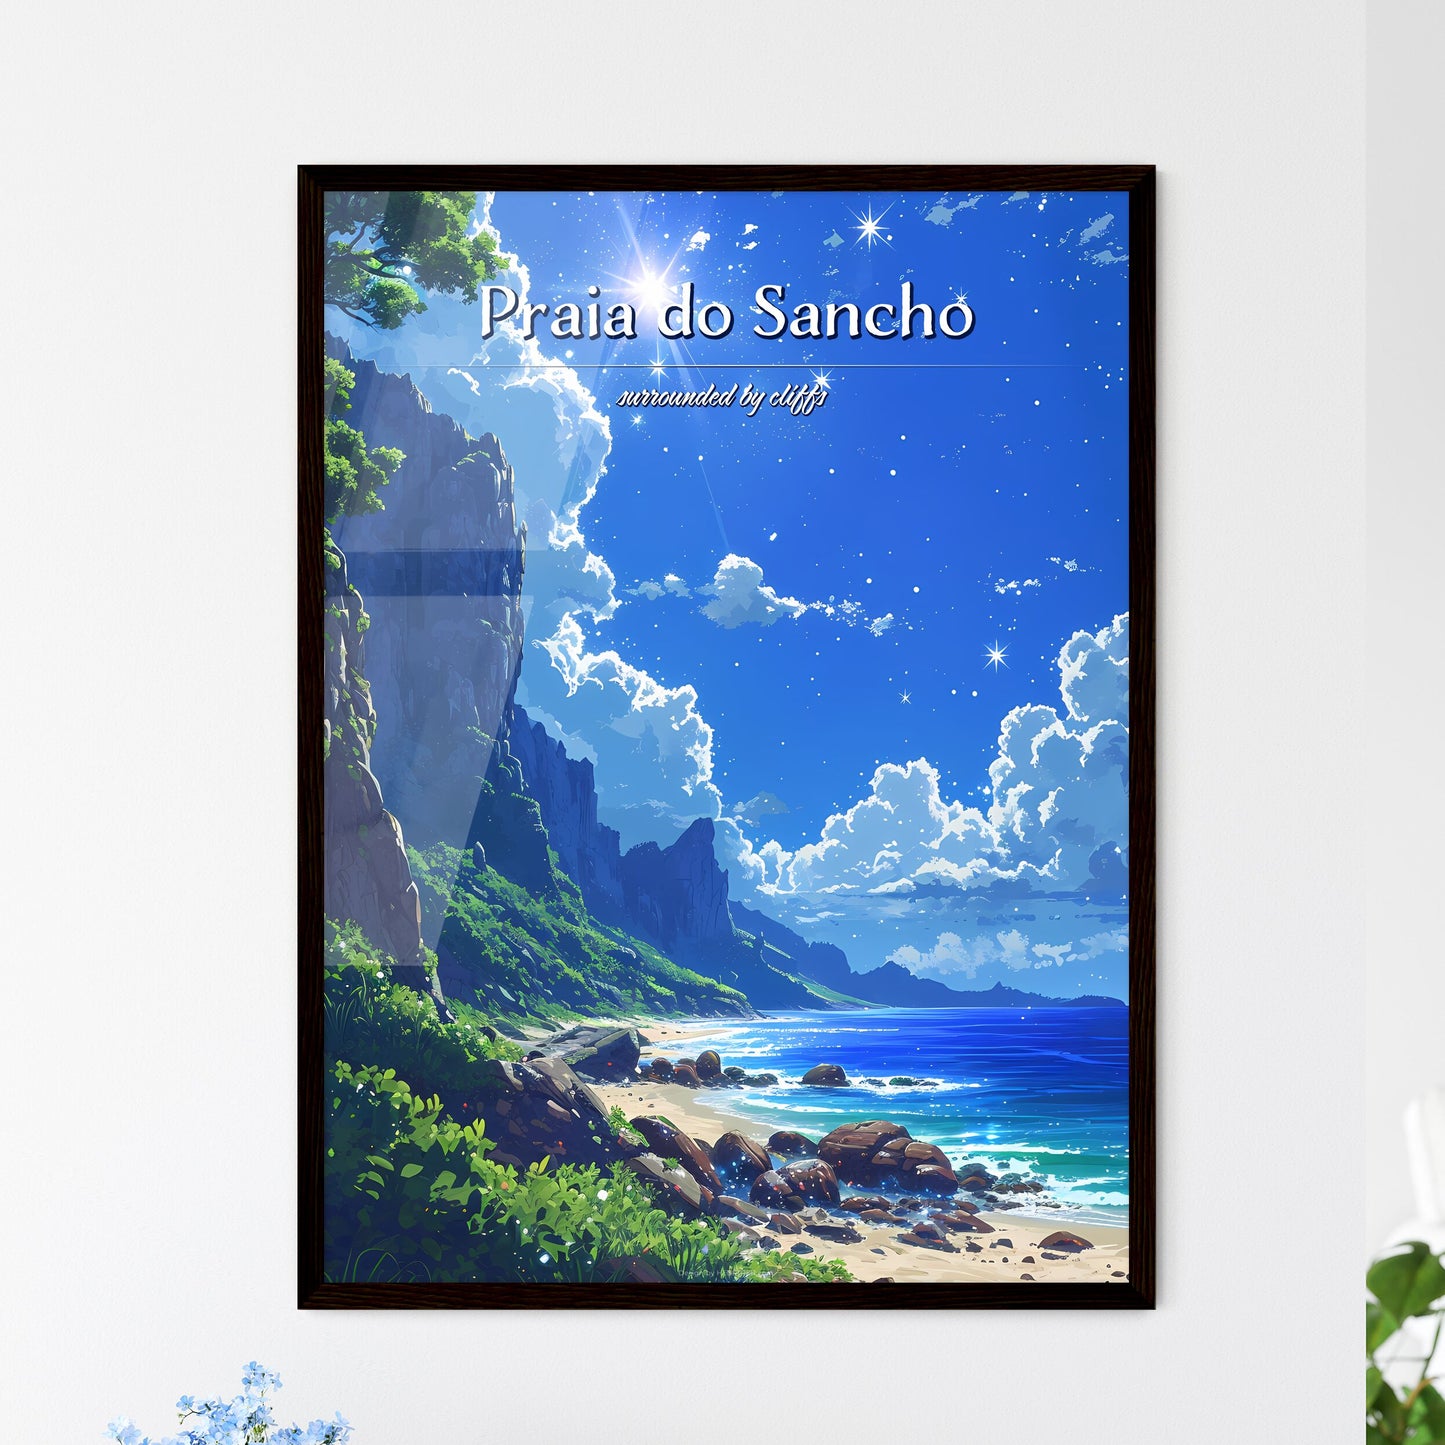 Praia do Sancho Beach - Art print of a beach with rocks and a body of water and a bright star Default Title